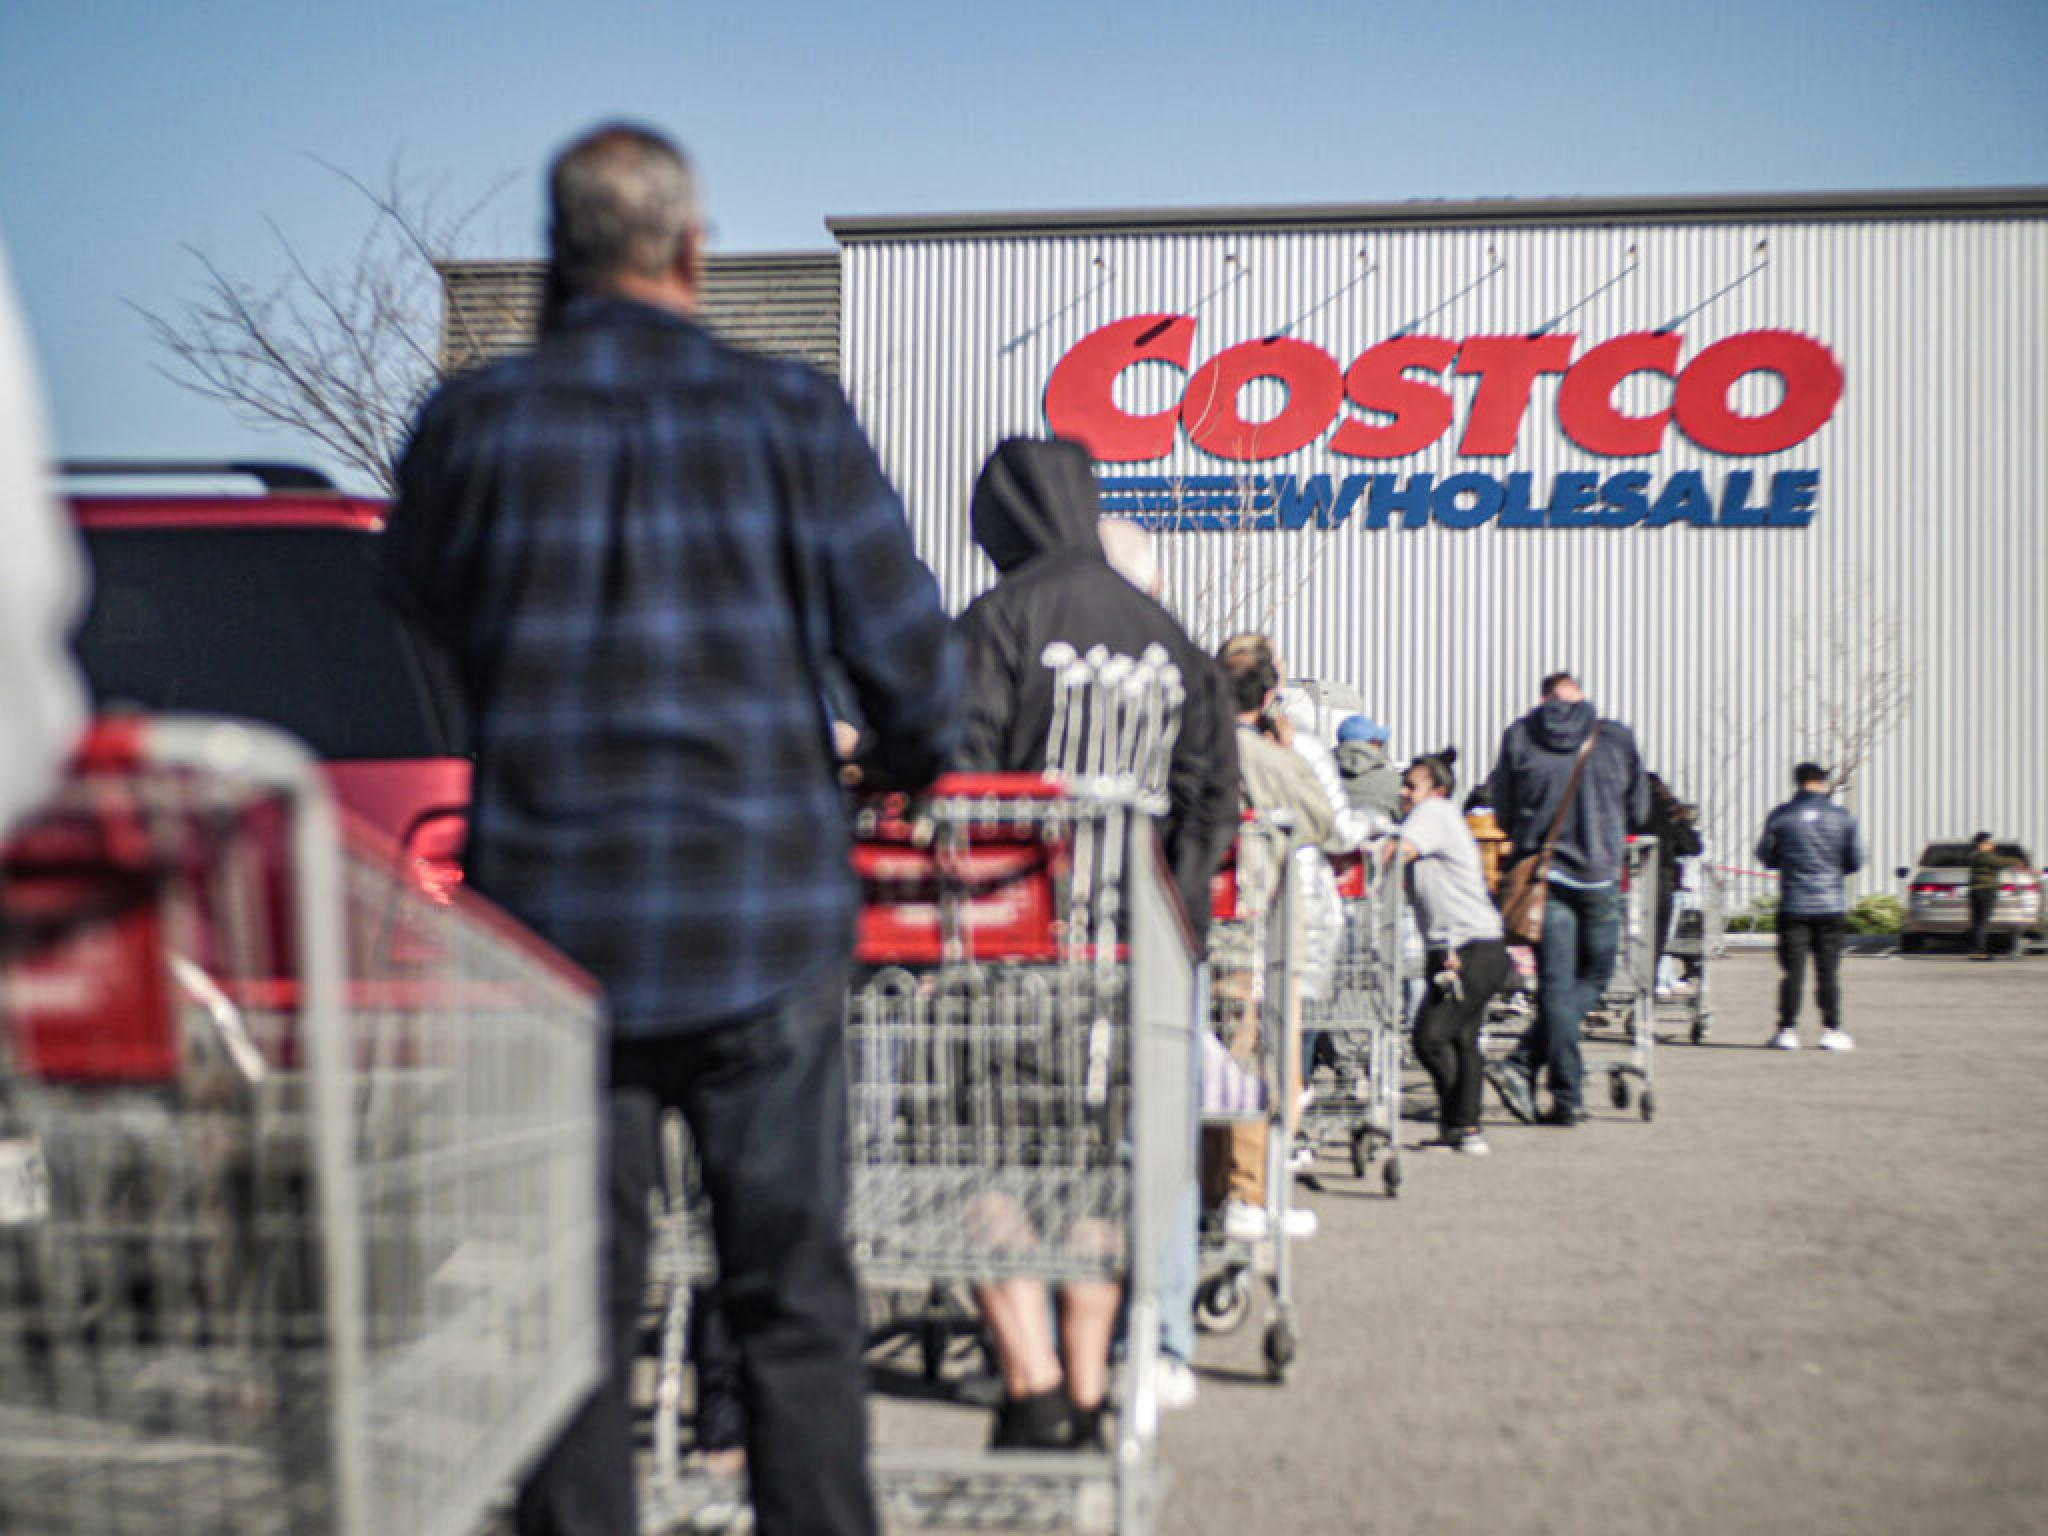  costco-stock-is-moving-wednesday-after-the-close-whats-going-on 